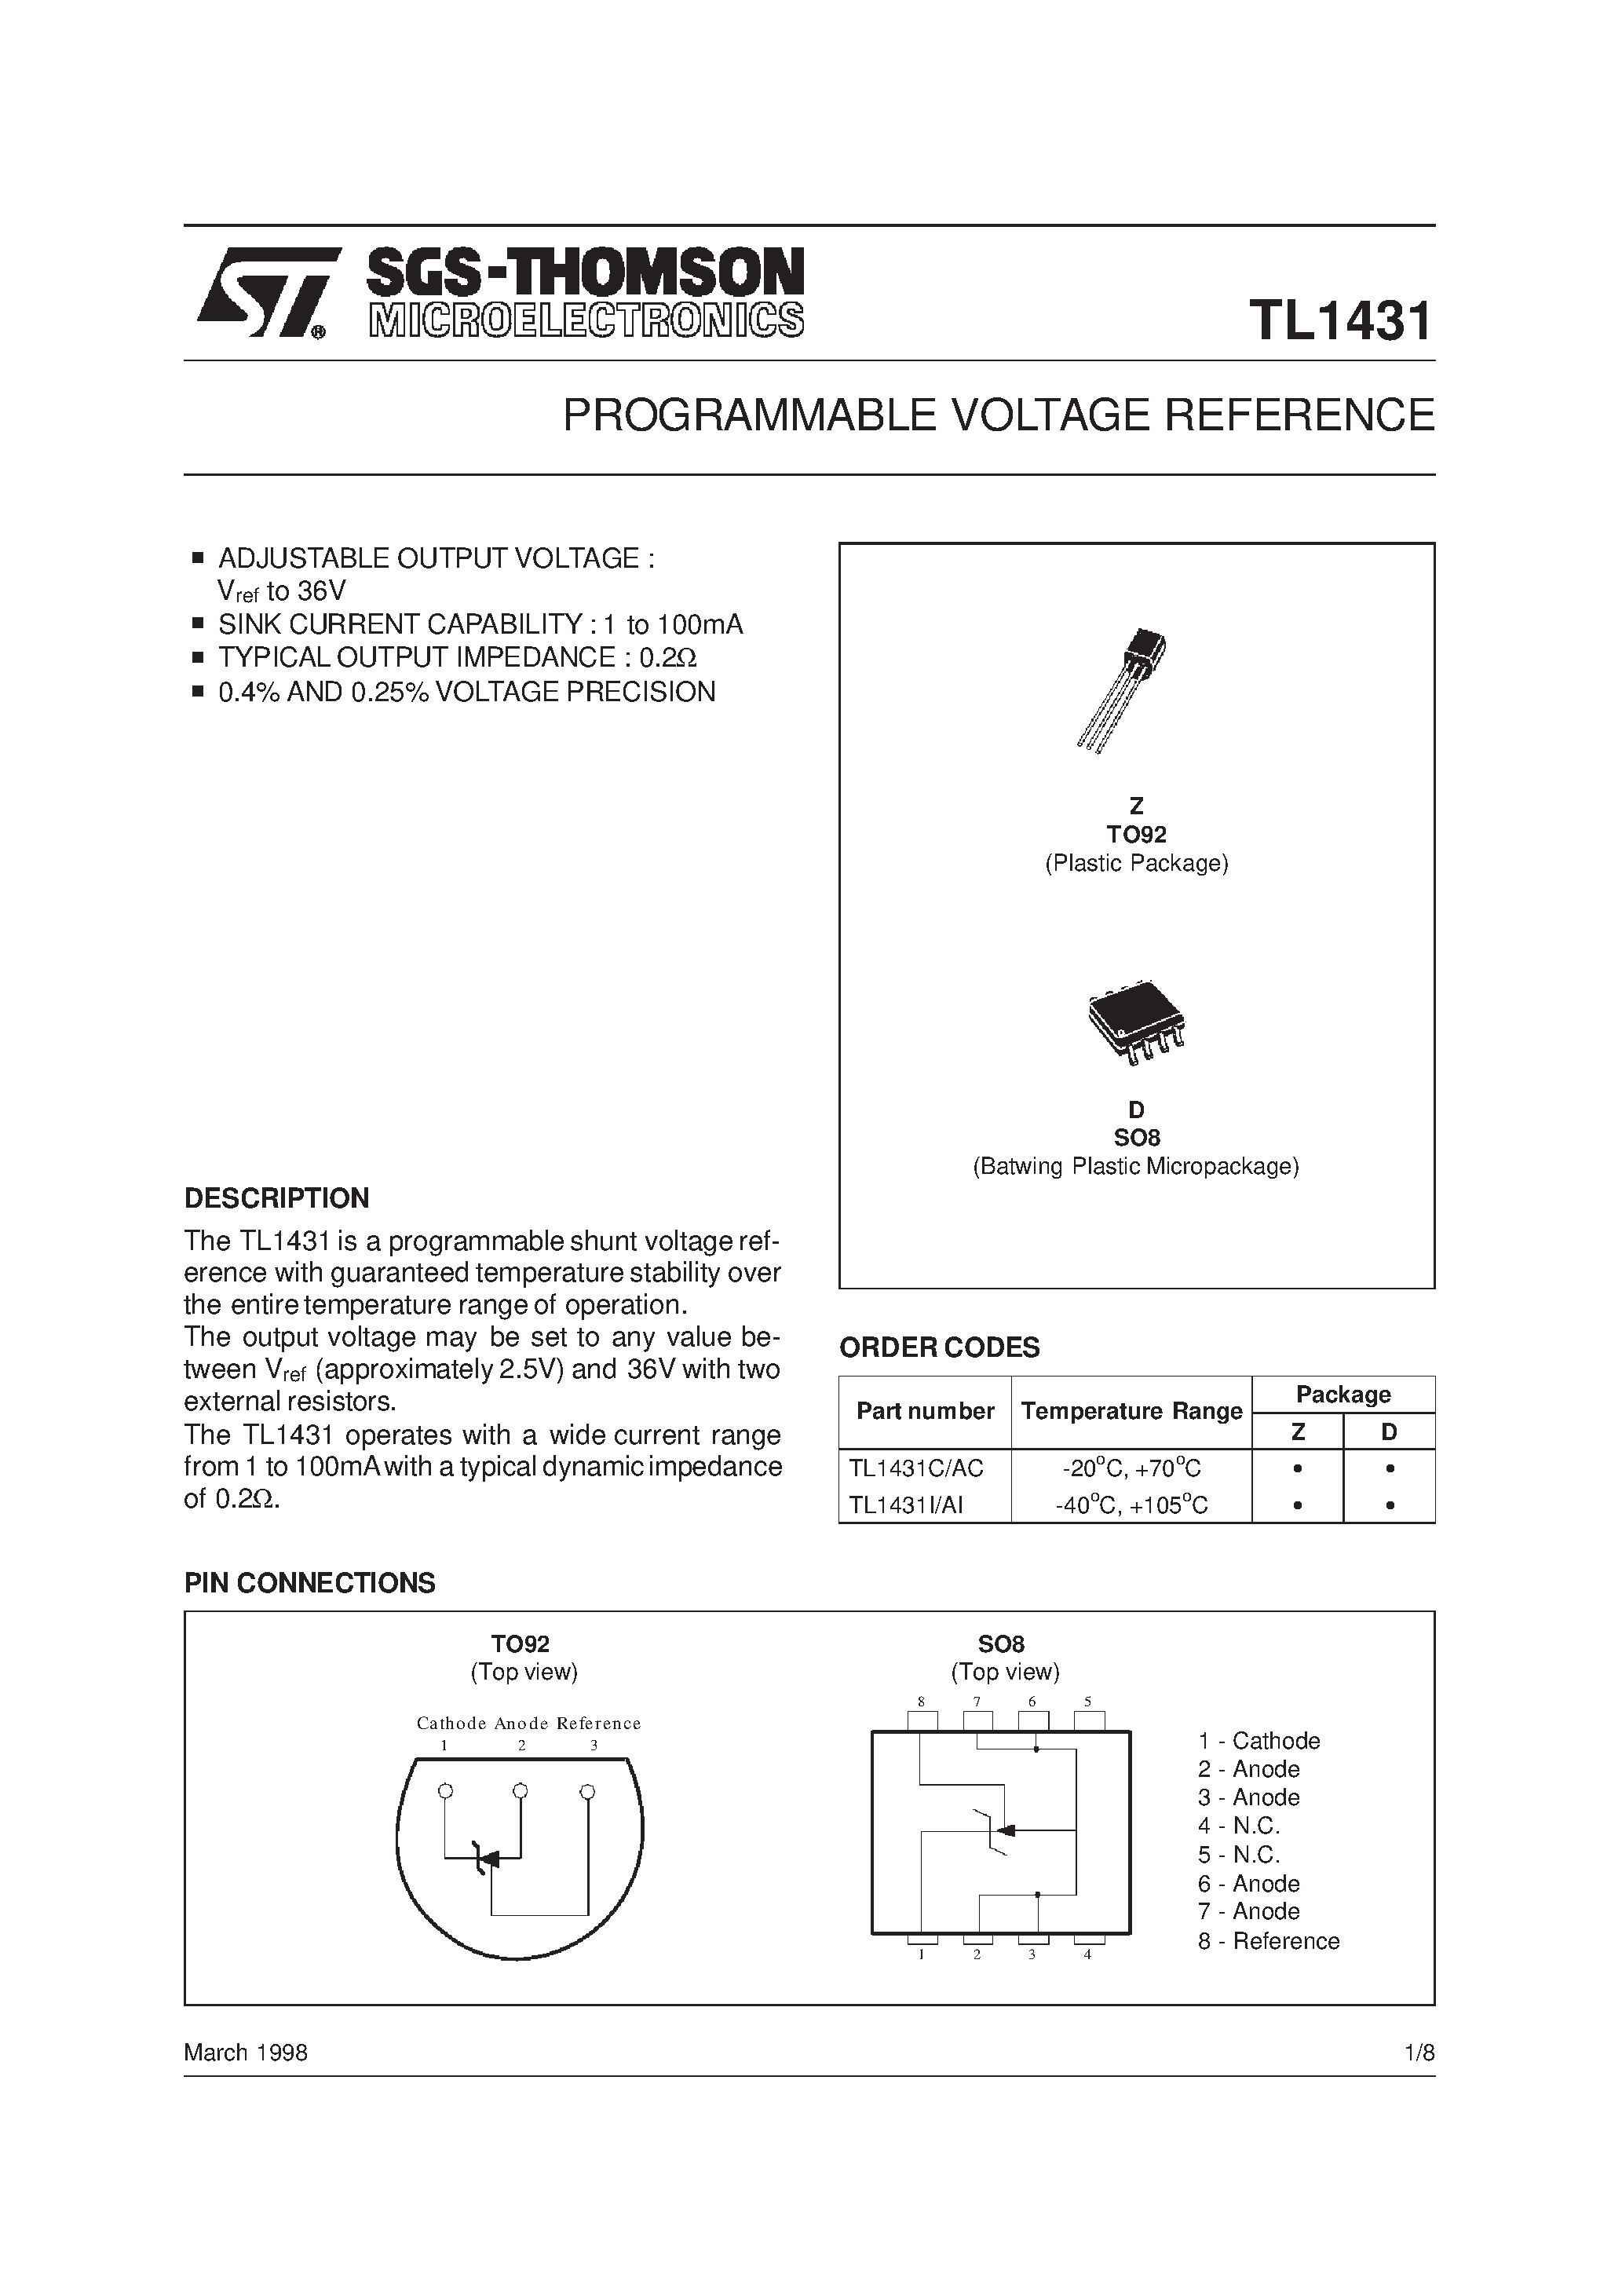 Даташит TL1431C - PROGRAMMABLE VOLTAGE REFERENCE страница 1